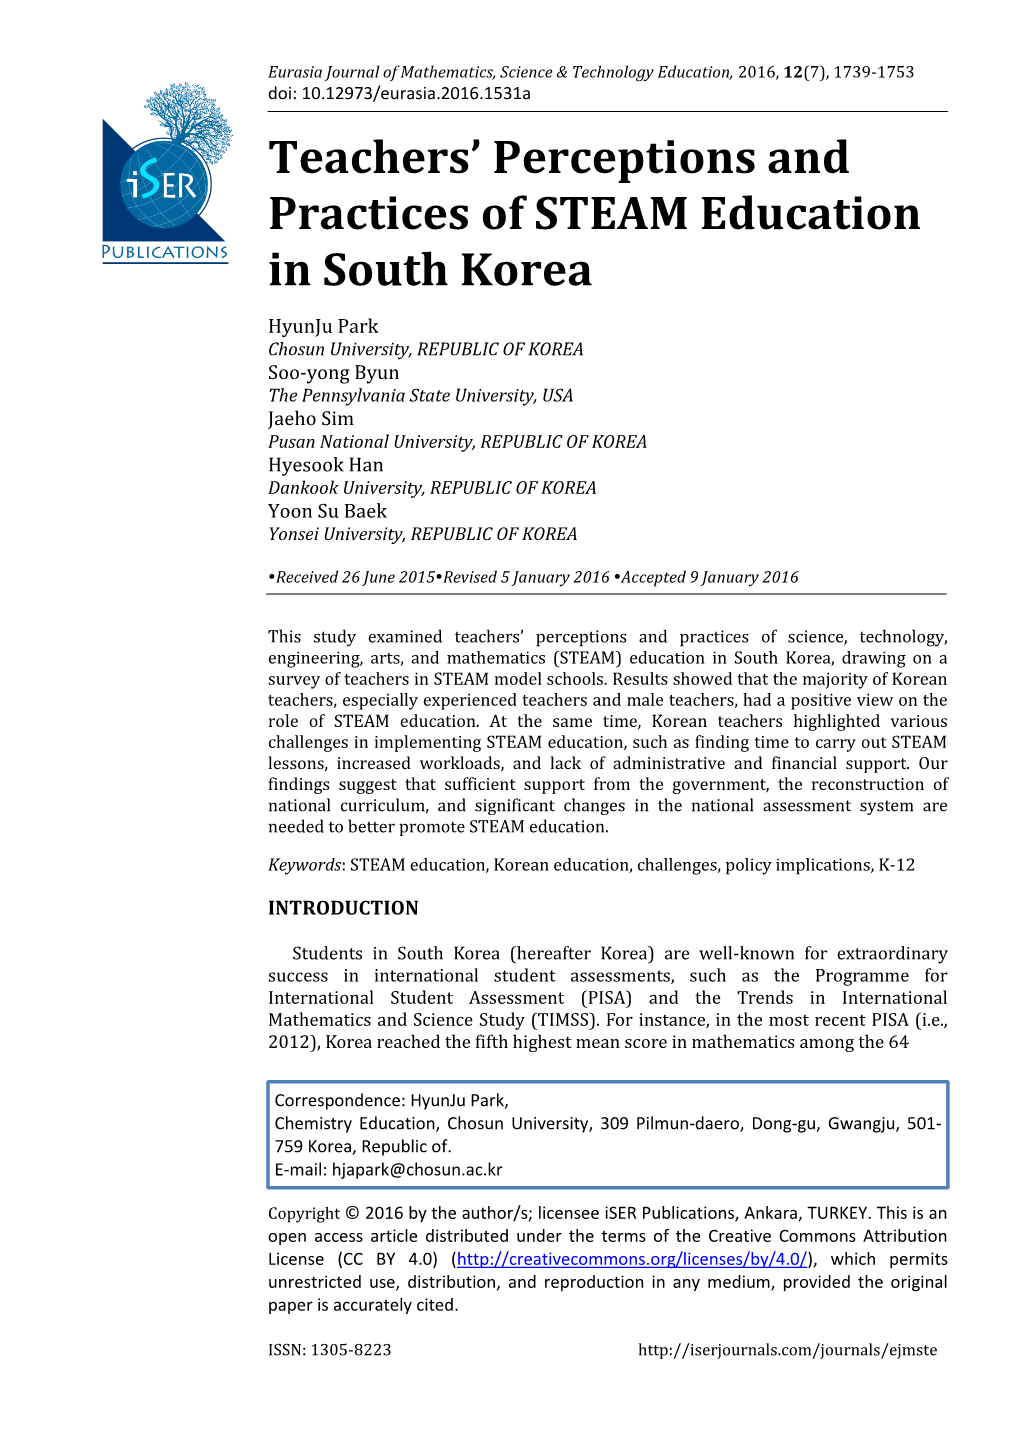 Teachers' Perceptions and Practices of STEAM Education in South Korea